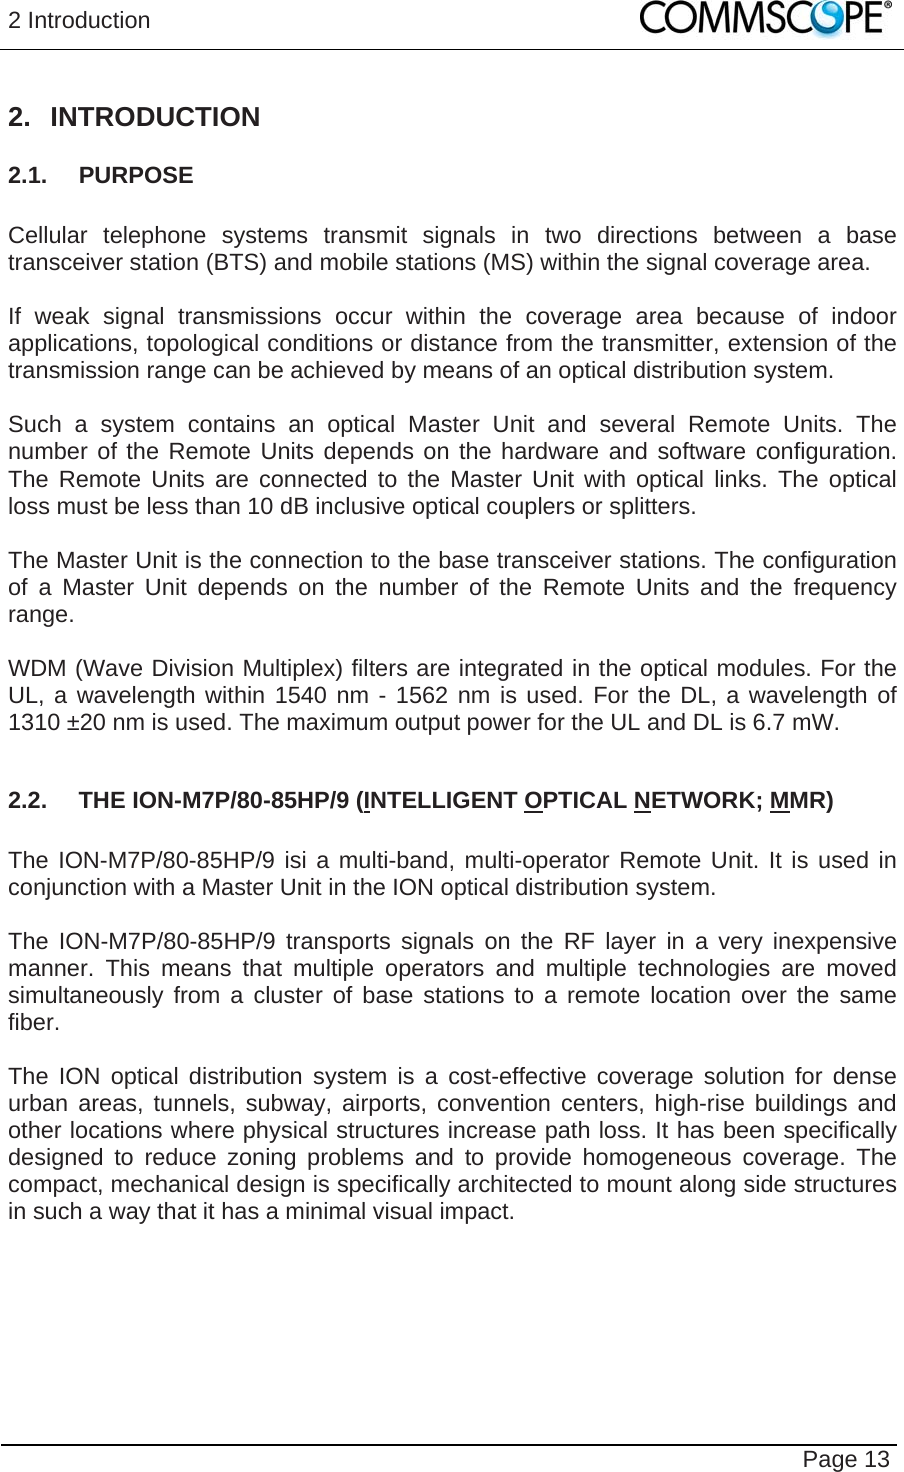 2 Introduction   Page 13 2. INTRODUCTION 2.1. PURPOSE  Cellular telephone systems transmit signals in two directions between a base transceiver station (BTS) and mobile stations (MS) within the signal coverage area.  If weak signal transmissions occur within the coverage area because of indoor applications, topological conditions or distance from the transmitter, extension of the transmission range can be achieved by means of an optical distribution system.  Such a system contains an optical Master Unit and several Remote Units. The number of the Remote Units depends on the hardware and software configuration. The Remote Units are connected to the Master Unit with optical links. The optical loss must be less than 10 dB inclusive optical couplers or splitters.  The Master Unit is the connection to the base transceiver stations. The configuration of a Master Unit depends on the number of the Remote Units and the frequency range.   WDM (Wave Division Multiplex) filters are integrated in the optical modules. For the UL, a wavelength within 1540 nm - 1562 nm is used. For the DL, a wavelength of 1310 ±20 nm is used. The maximum output power for the UL and DL is 6.7 mW.  2.2.  THE ION-M7P/80-85HP/9 (INTELLIGENT OPTICAL NETWORK; MMR)  The ION-M7P/80-85HP/9 isi a multi-band, multi-operator Remote Unit. It is used in conjunction with a Master Unit in the ION optical distribution system.  The ION-M7P/80-85HP/9 transports signals on the RF layer in a very inexpensive manner. This means that multiple operators and multiple technologies are moved simultaneously from a cluster of base stations to a remote location over the same fiber.  The ION optical distribution system is a cost-effective coverage solution for dense urban areas, tunnels, subway, airports, convention centers, high-rise buildings and other locations where physical structures increase path loss. It has been specifically designed to reduce zoning problems and to provide homogeneous coverage. The compact, mechanical design is specifically architected to mount along side structures in such a way that it has a minimal visual impact.  